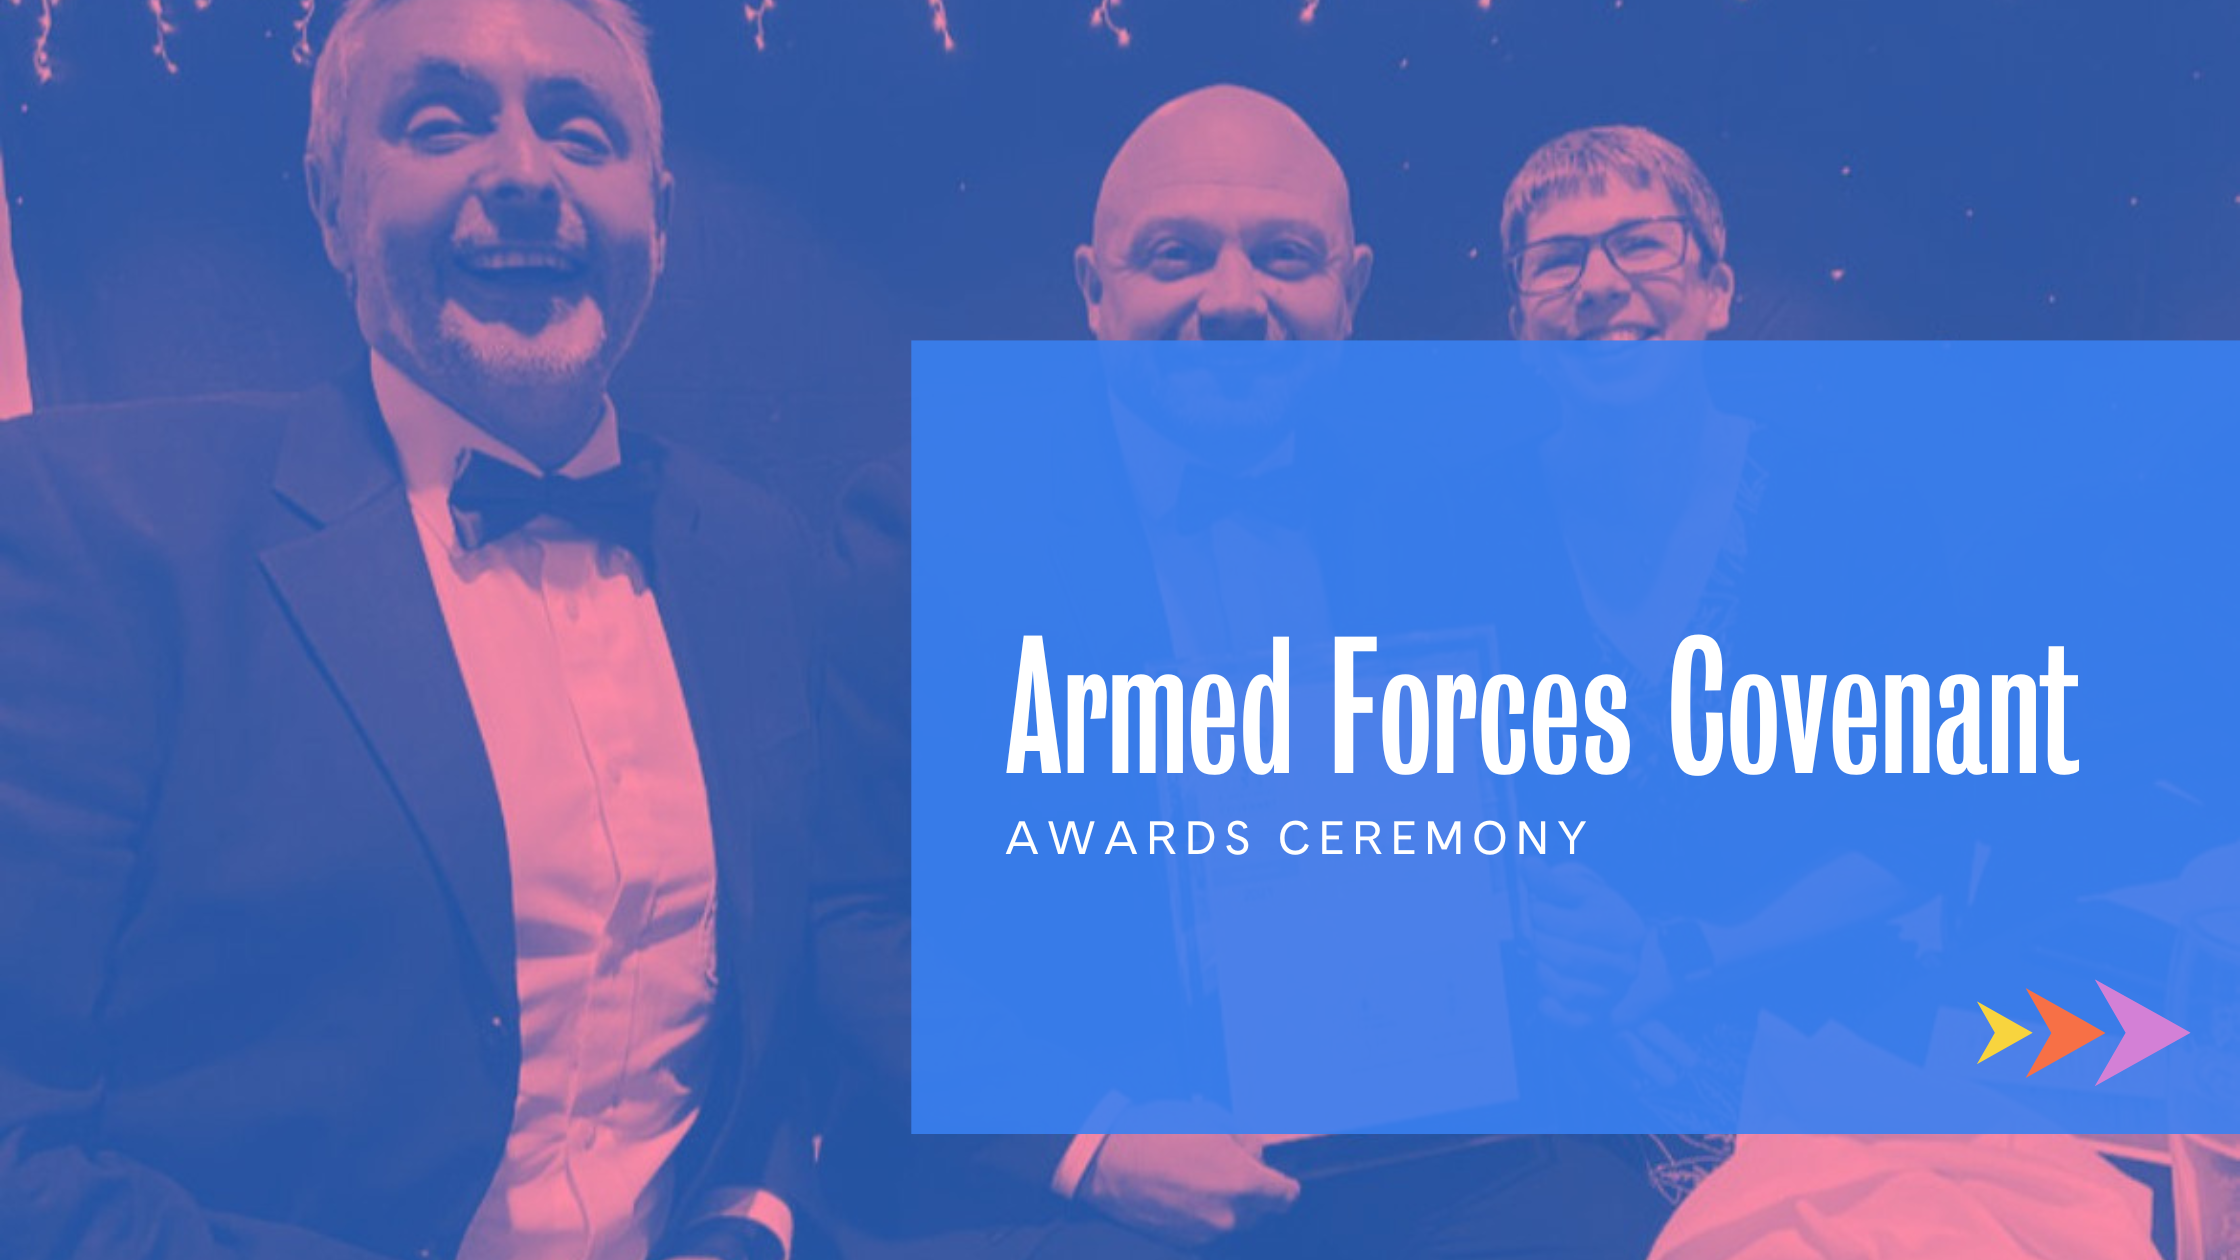 Armed Forces Covenant Awards Ceremony